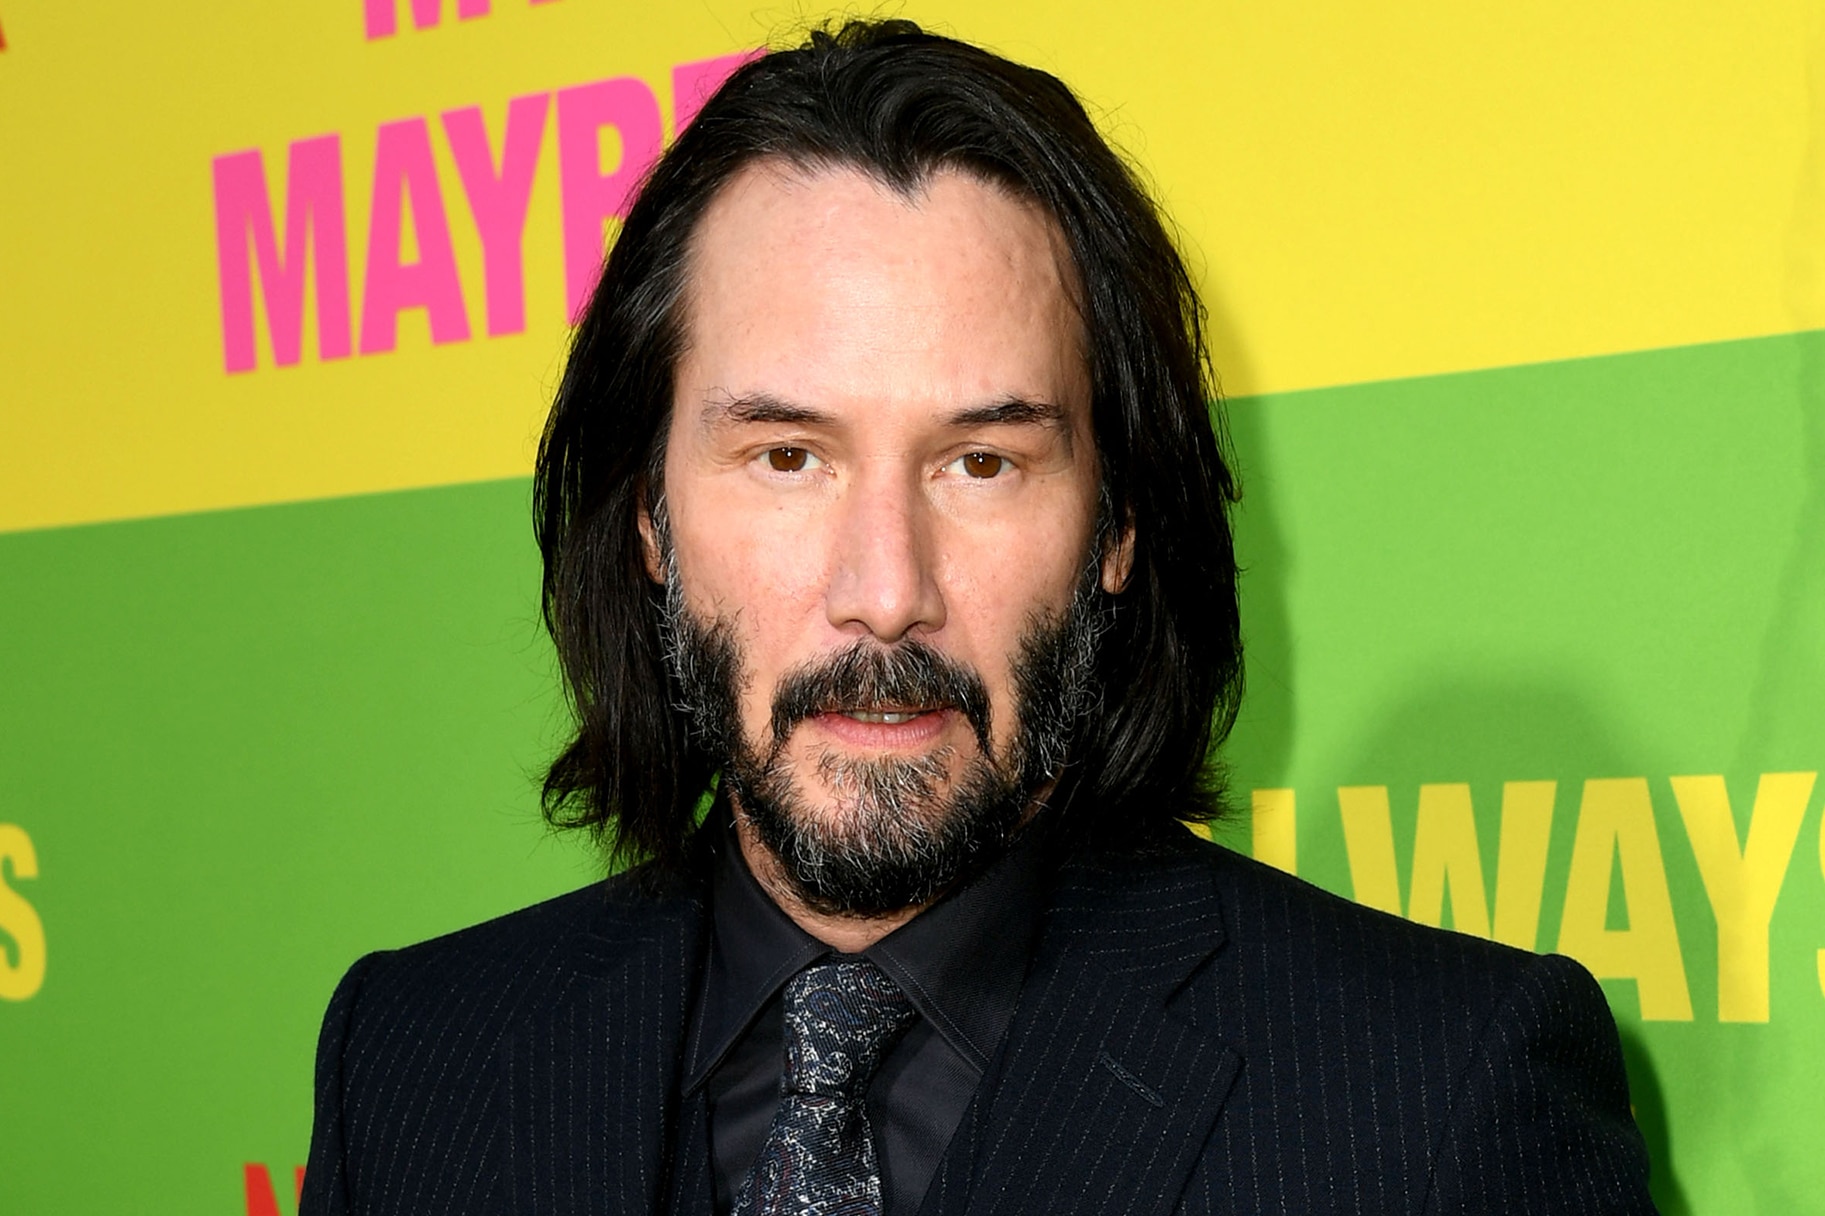 Is Keanu Reeves Dating or Married to Winona Ryder? Says He's Lonely | Personal Space